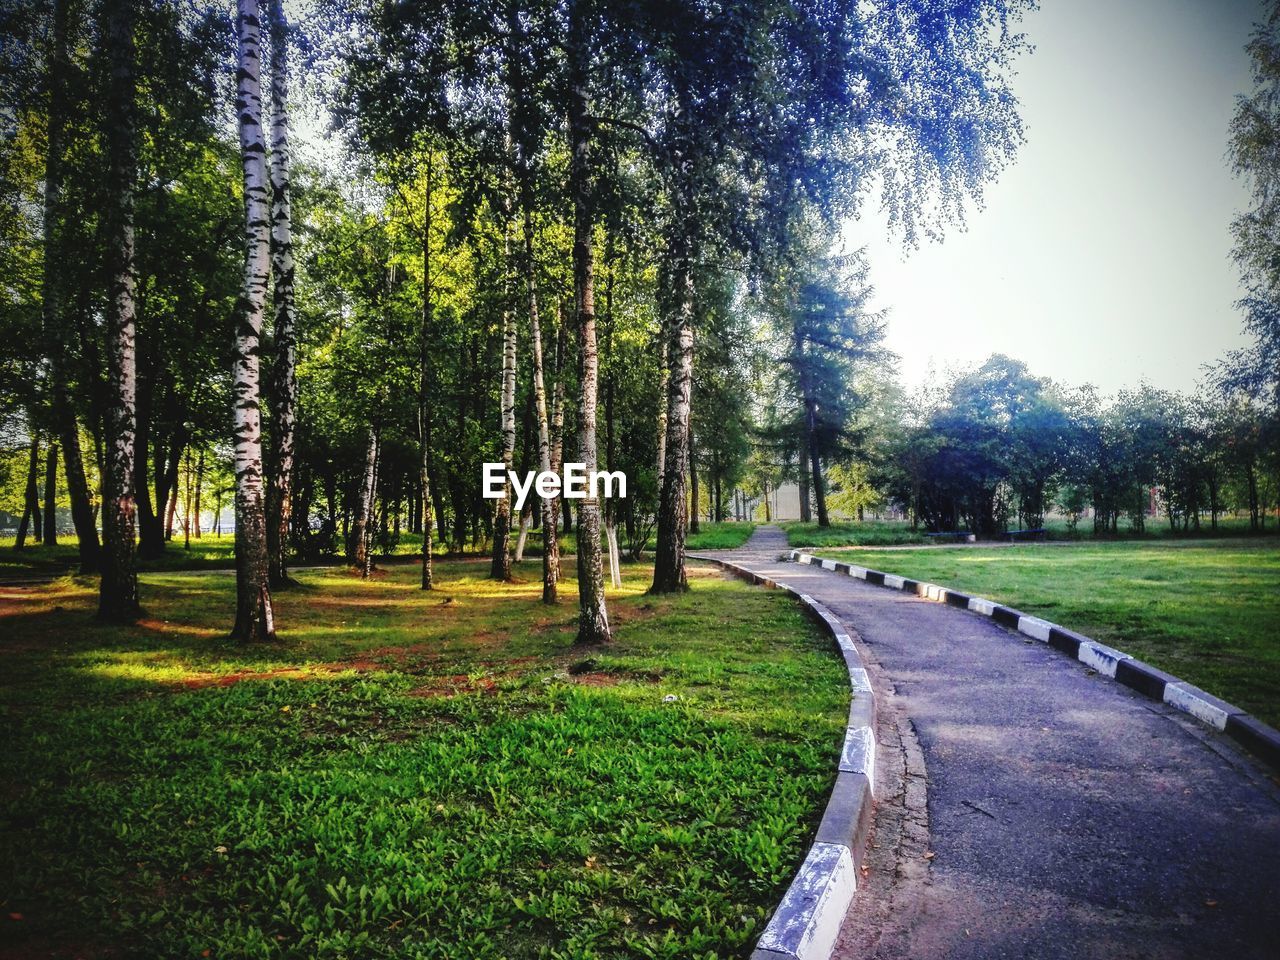 VIEW OF TREES IN PARK